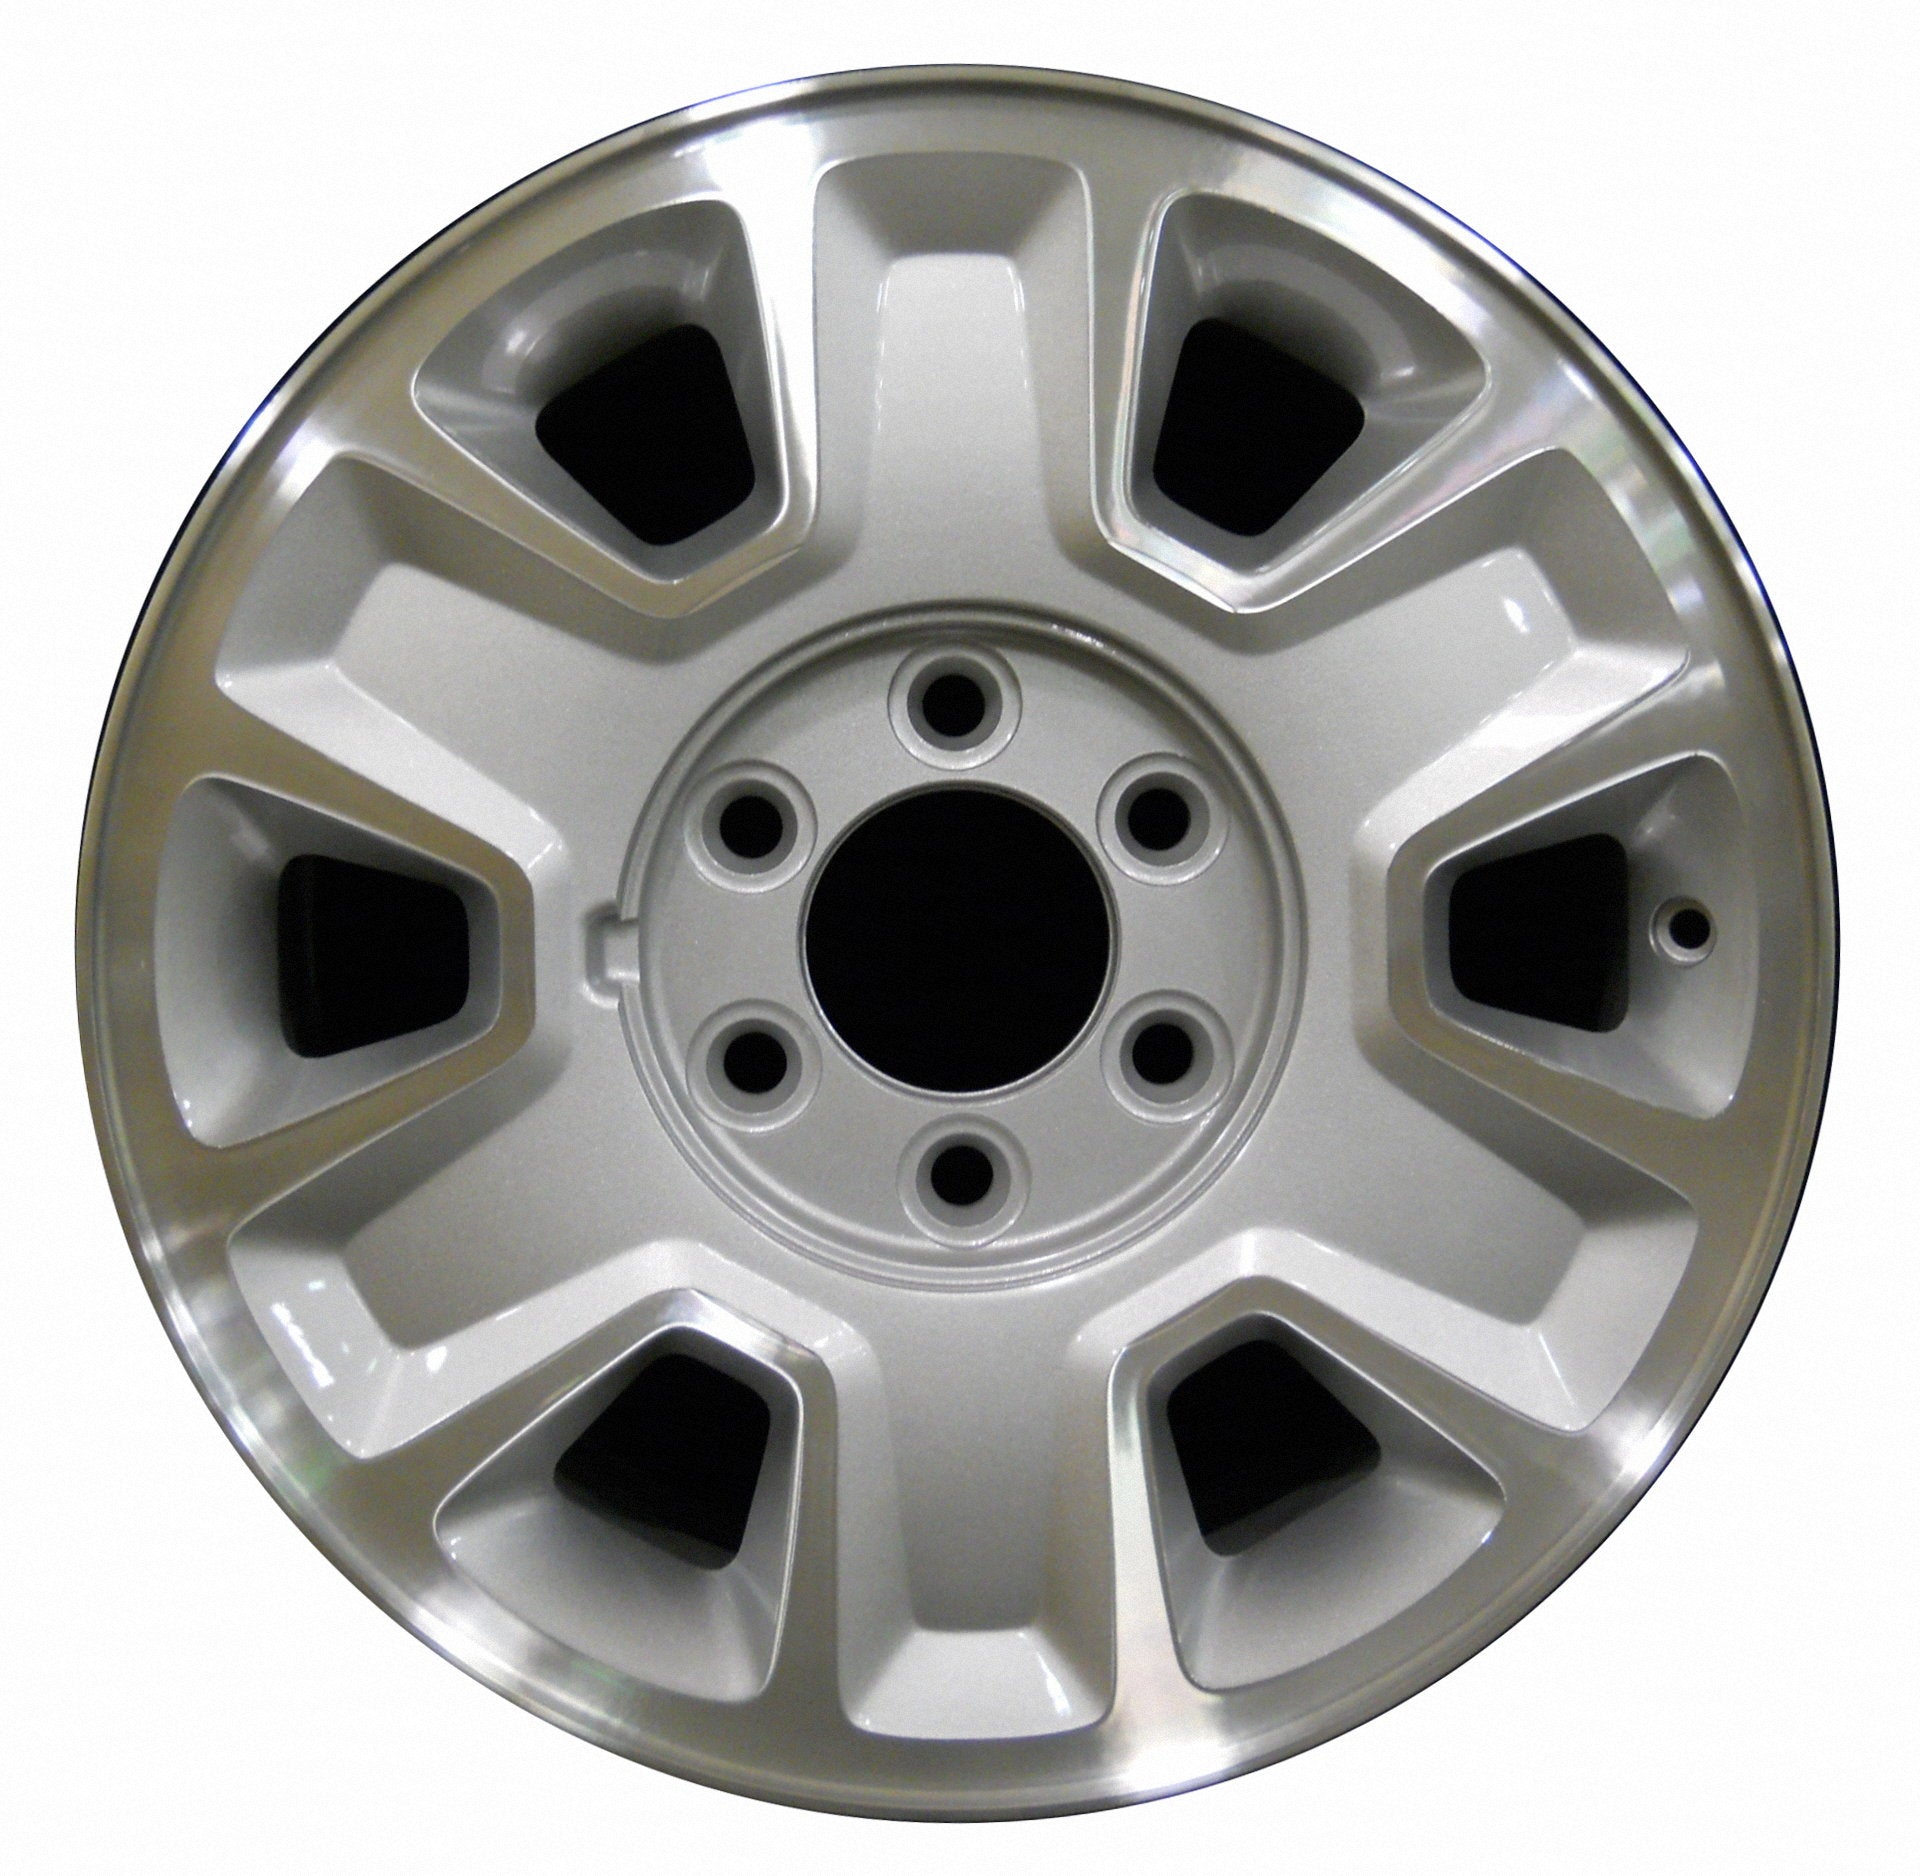 Ford F150 Truck  2009, 2010, 2011, 2012, 2013, 2014 Factory OEM Car Wheel Size 17x7.5 Alloy WAO.3780.PS13.MA